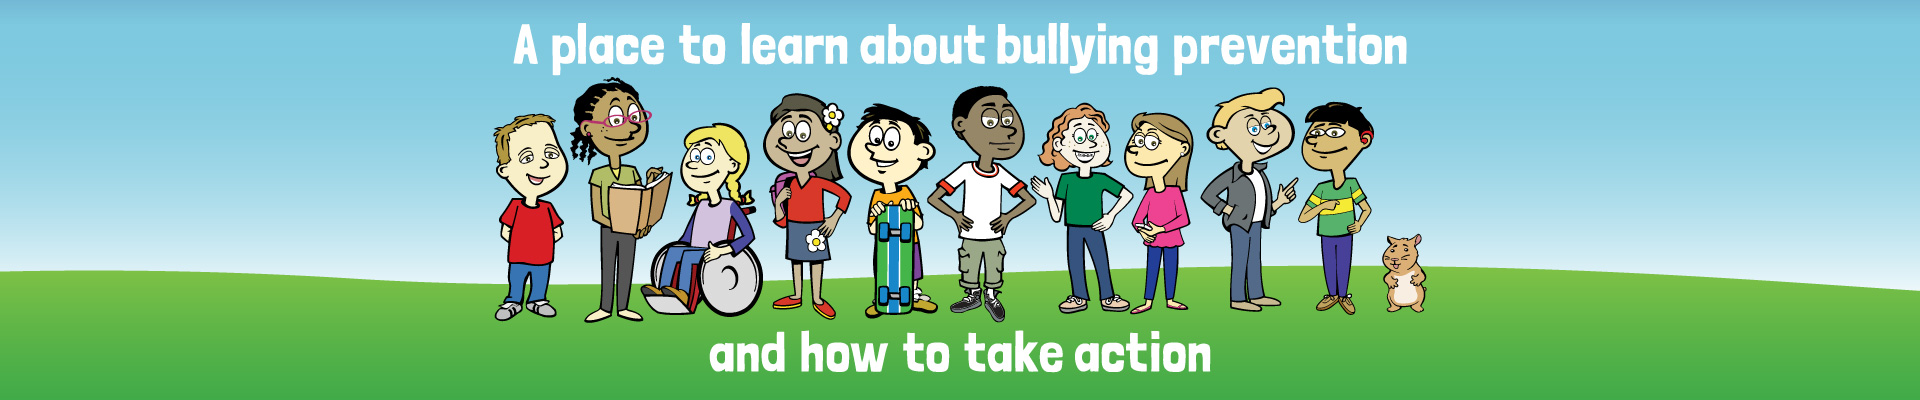 A place to learn about bullying prevention and how to take action